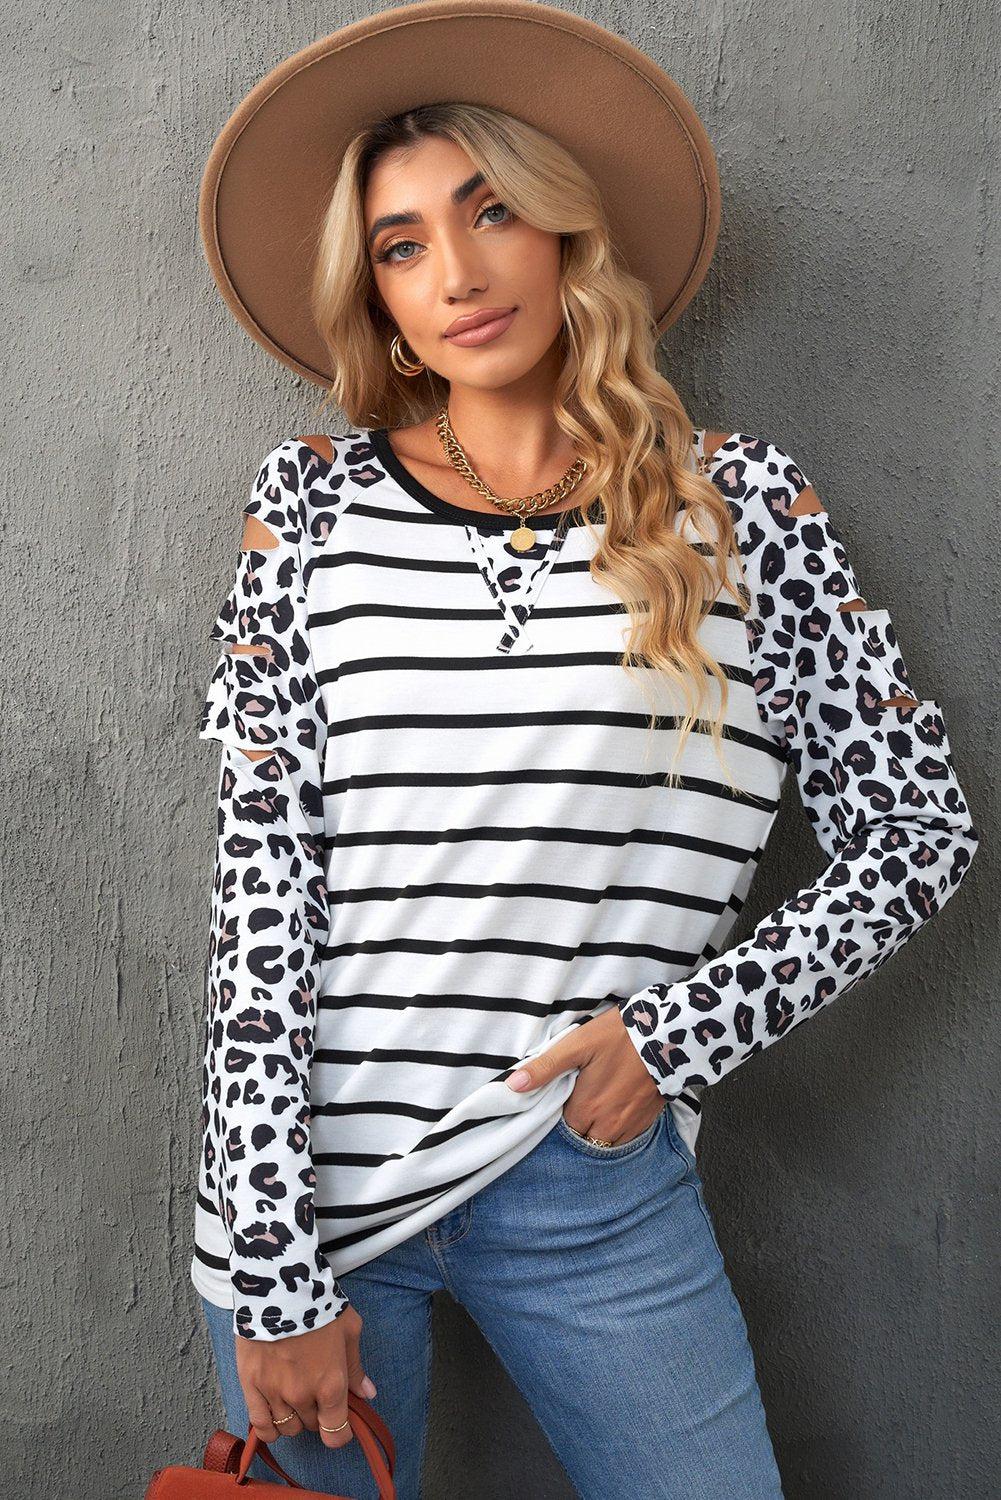 Leopard Print Striped Distressed Long Sleeve Tee-TOPS / DRESSES-[Adult]-[Female]-White-S-Blue Zone Planet